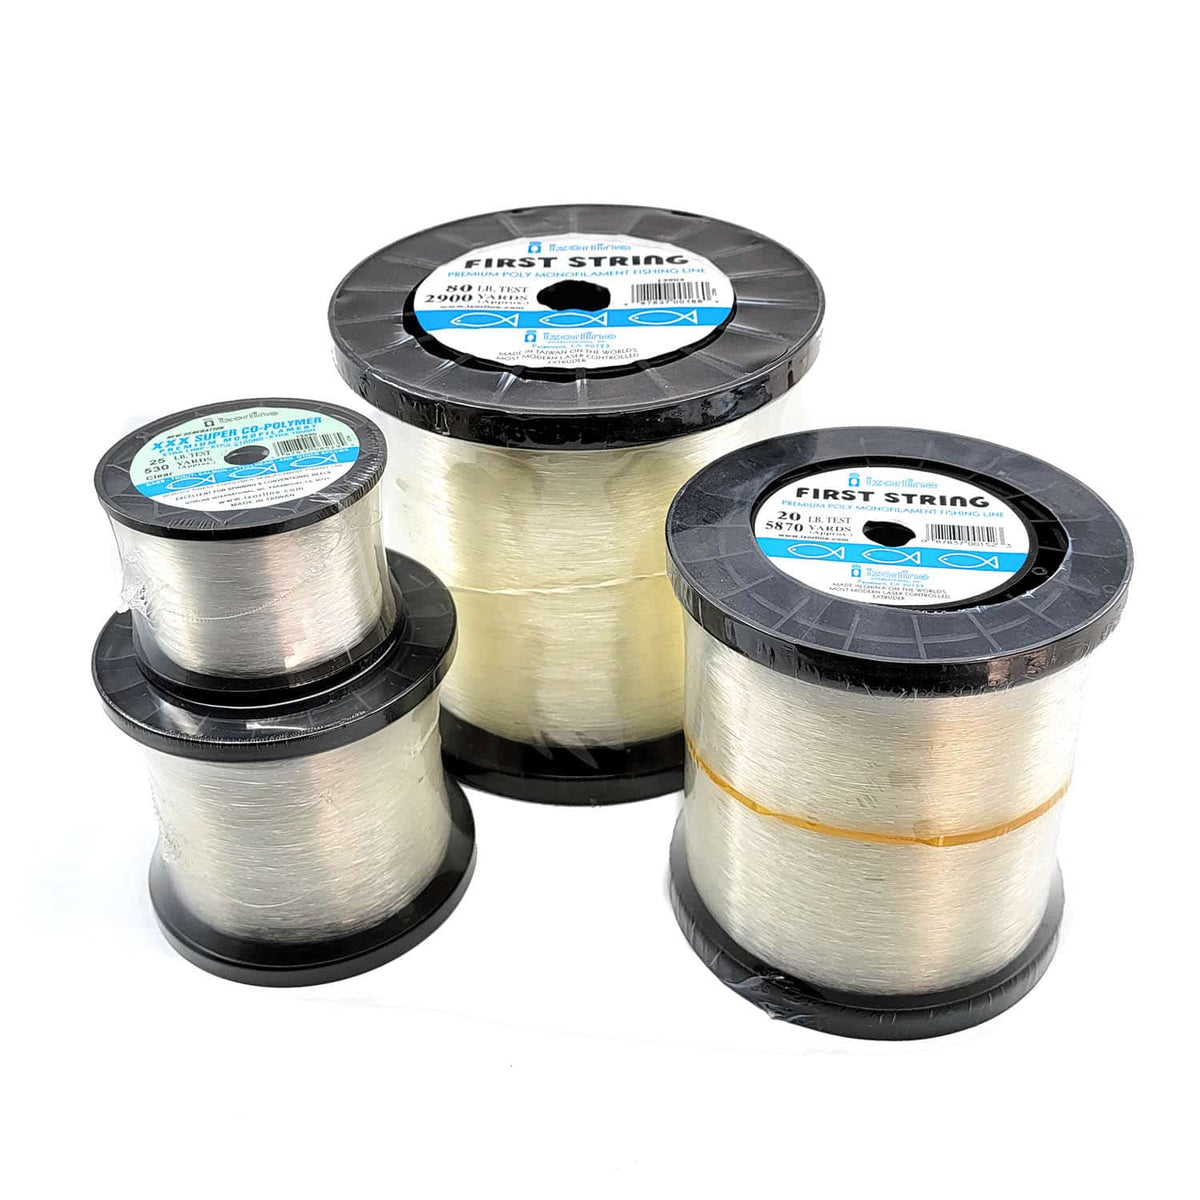 Billfisher Spool Clear 1 lb. Monofilament Fishing Line, High Abrasion  Resistance, Superior Construction, Soft & Flexible